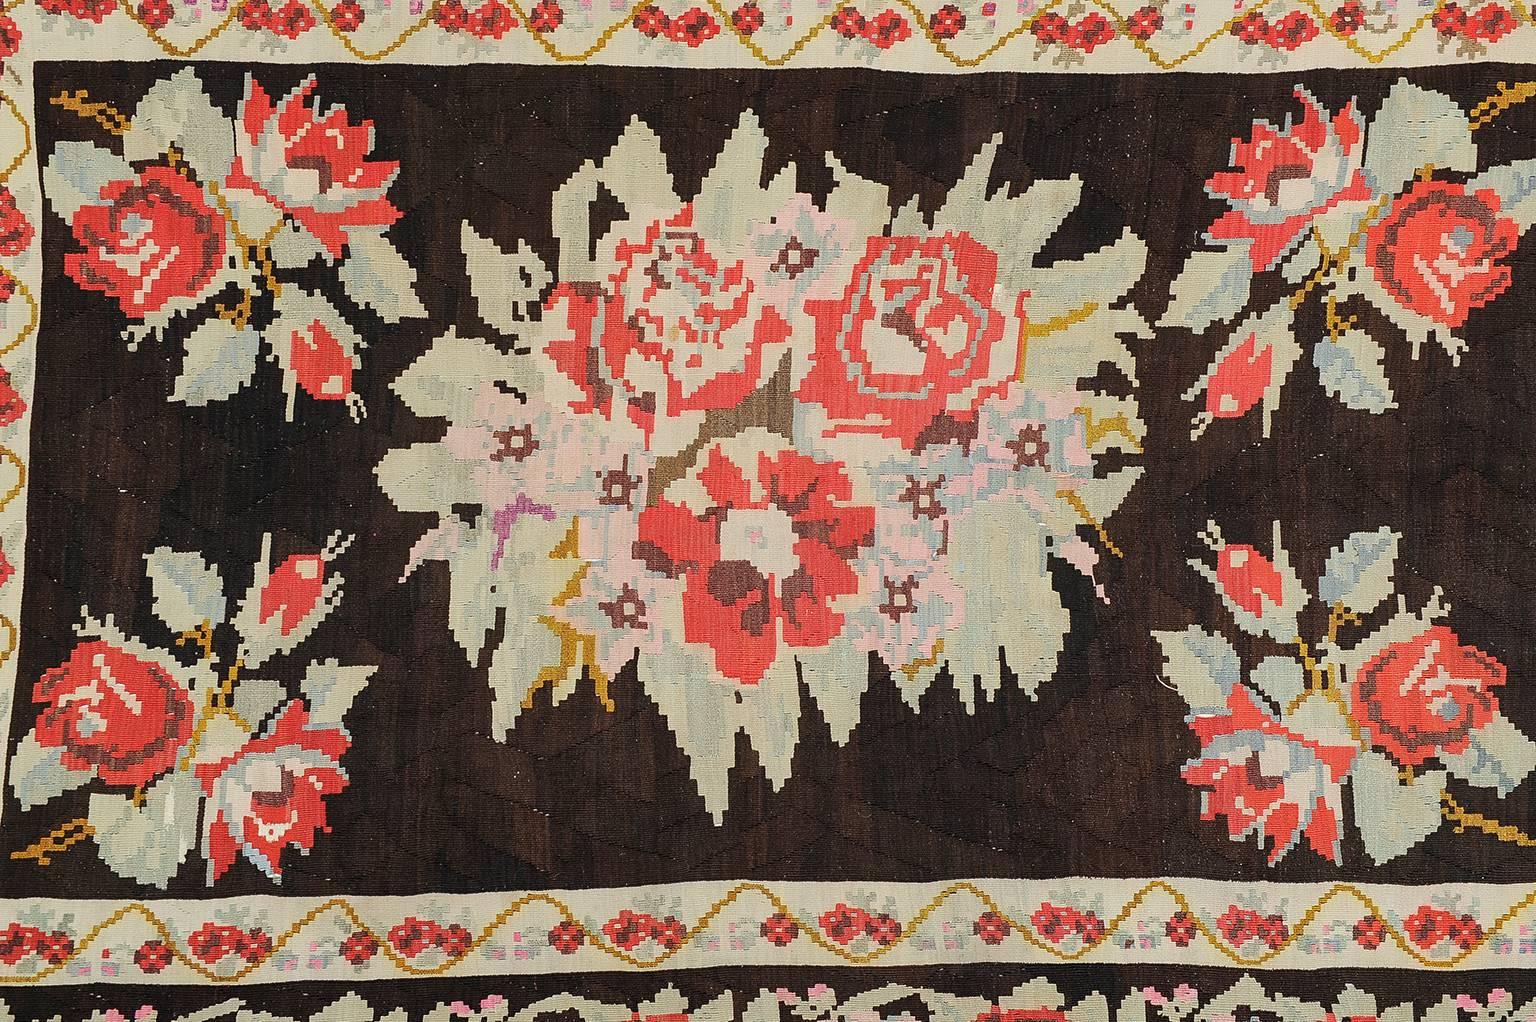 Hand-Woven Old  Caucasian Kilim KARABAGH or Flatwave with Red Roses For Sale